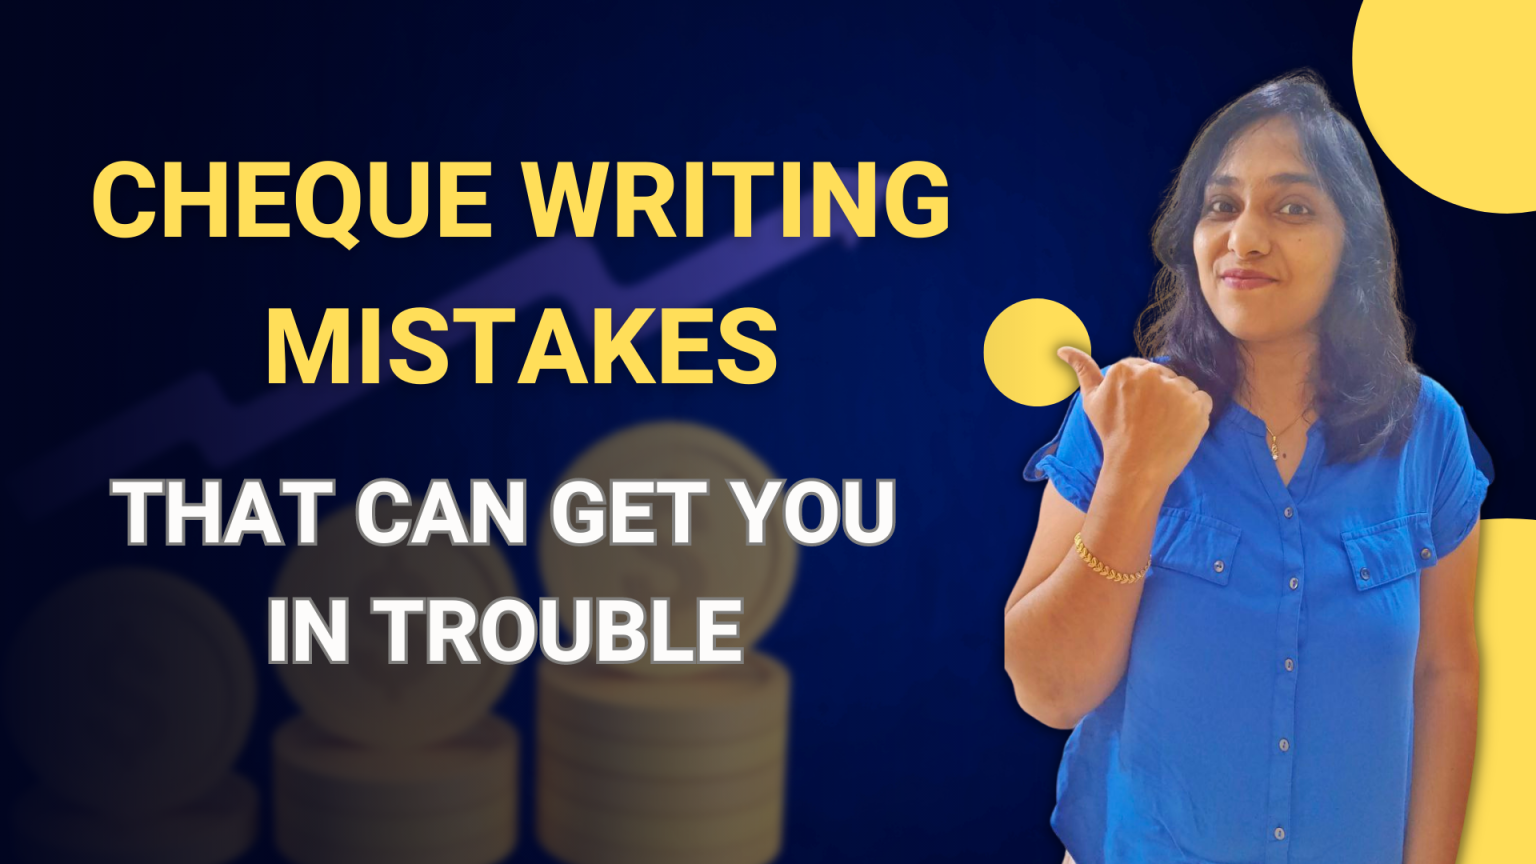 cheque-writing-mistakes-that-can-get-you-in-trouble-how-to-write-a